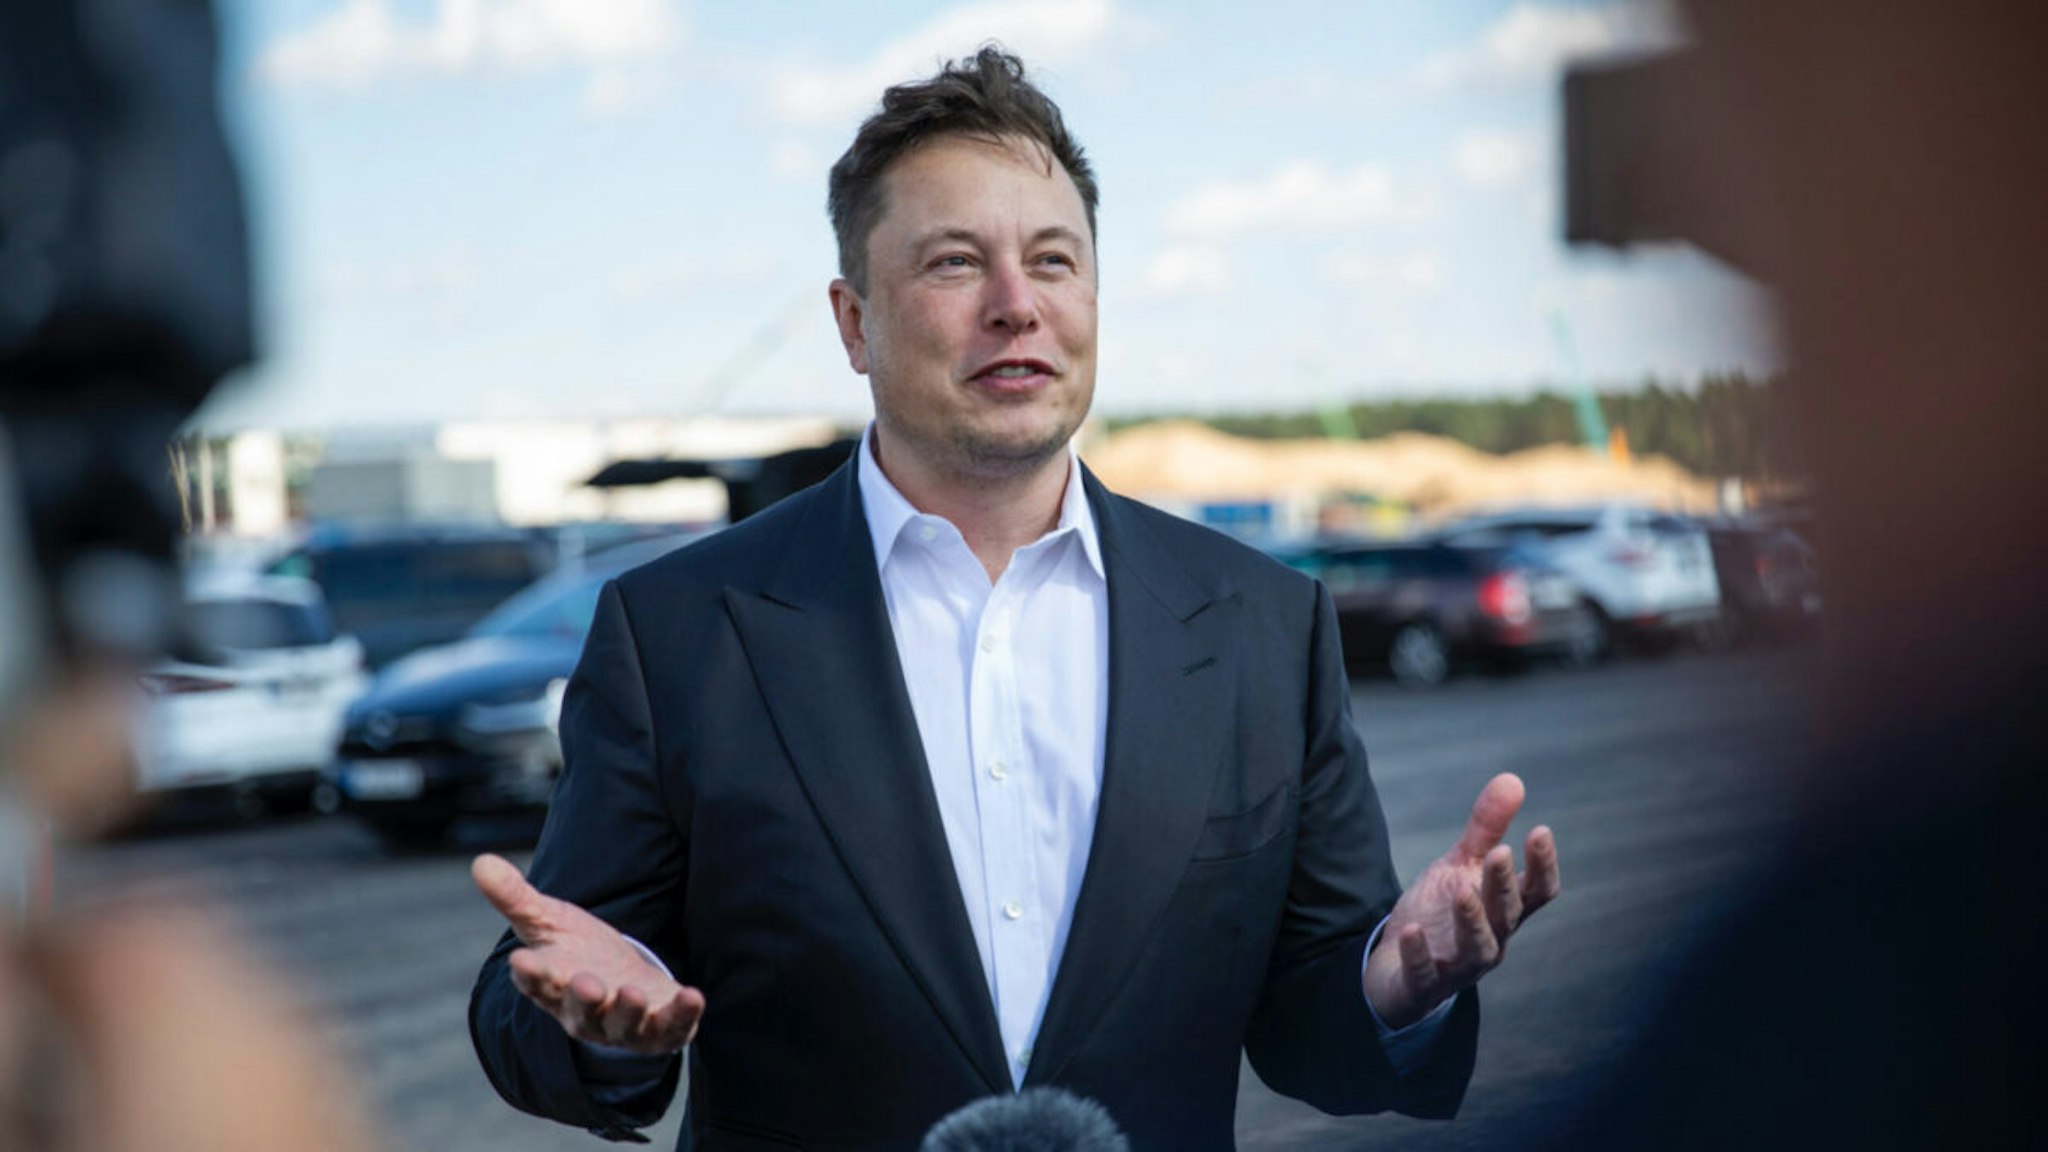 Tesla head Elon Musk talks to the press as he arrives to to have a look at the construction site of the new Tesla Gigafactory near Berlin on September 03, 2020 near Gruenheide, Germany.